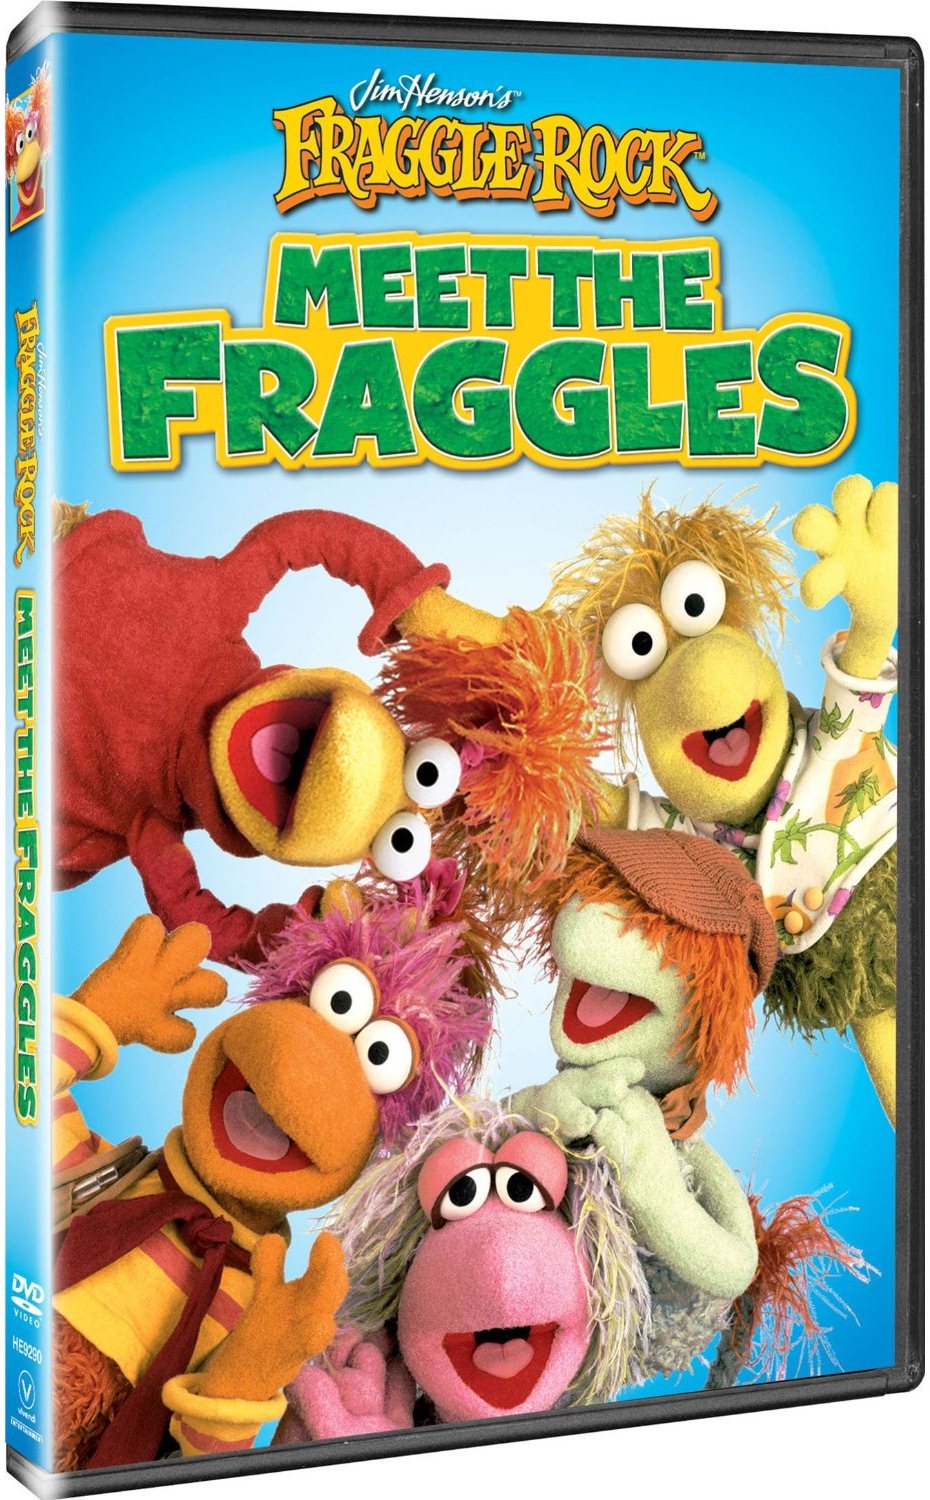 The Fraggles